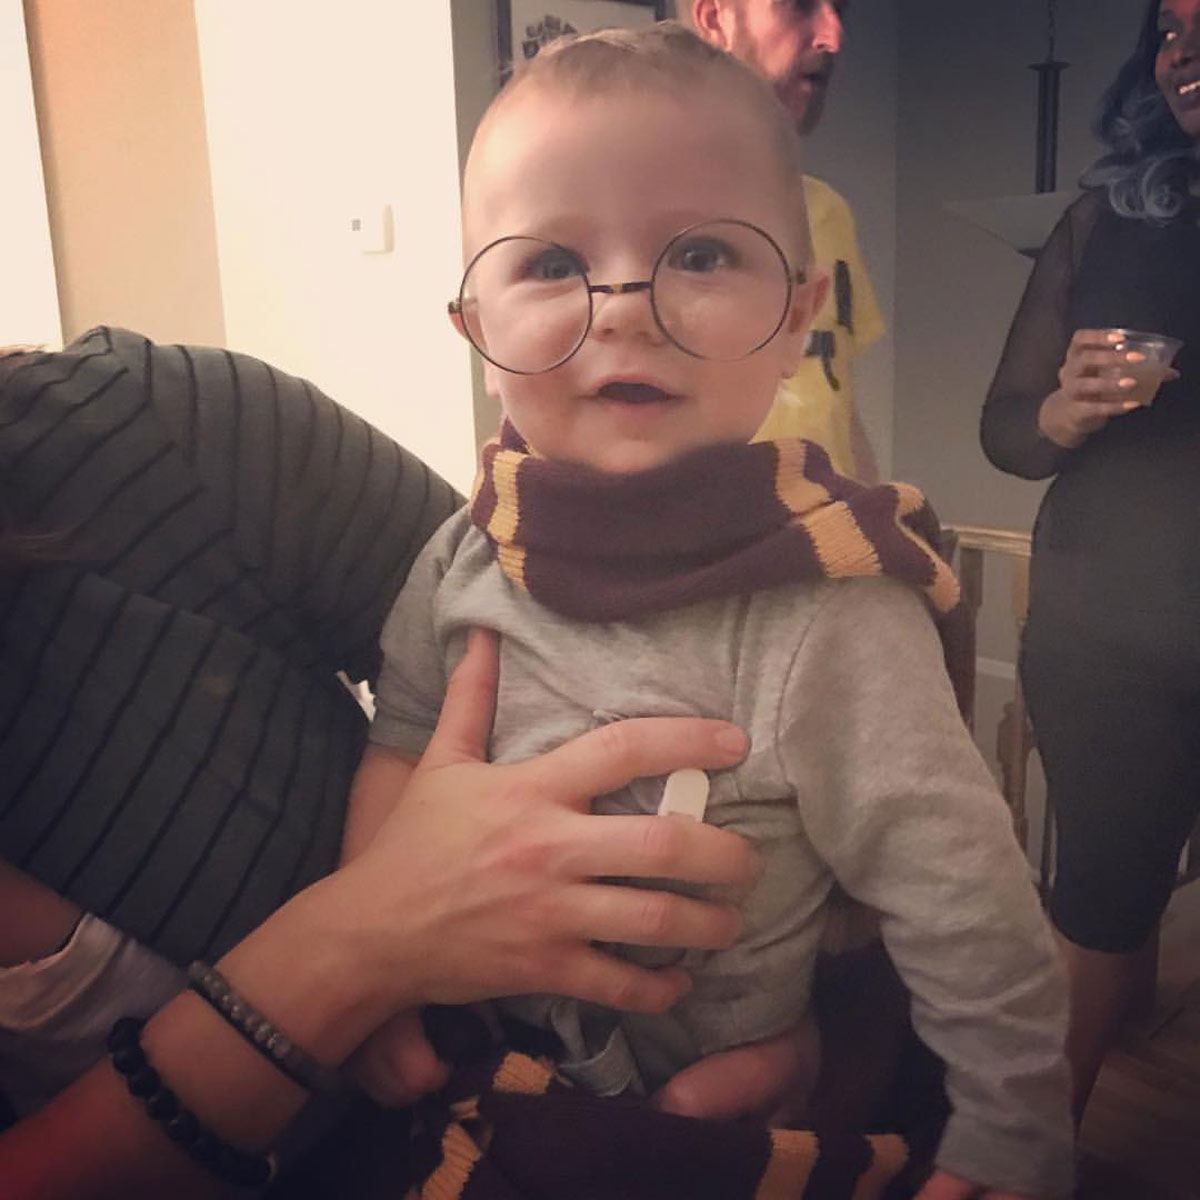 Harry Potter, you don't look a day over 8-months! WTOP's Rachel Nania and son Isaac. (WTOP/Rachel Nania)